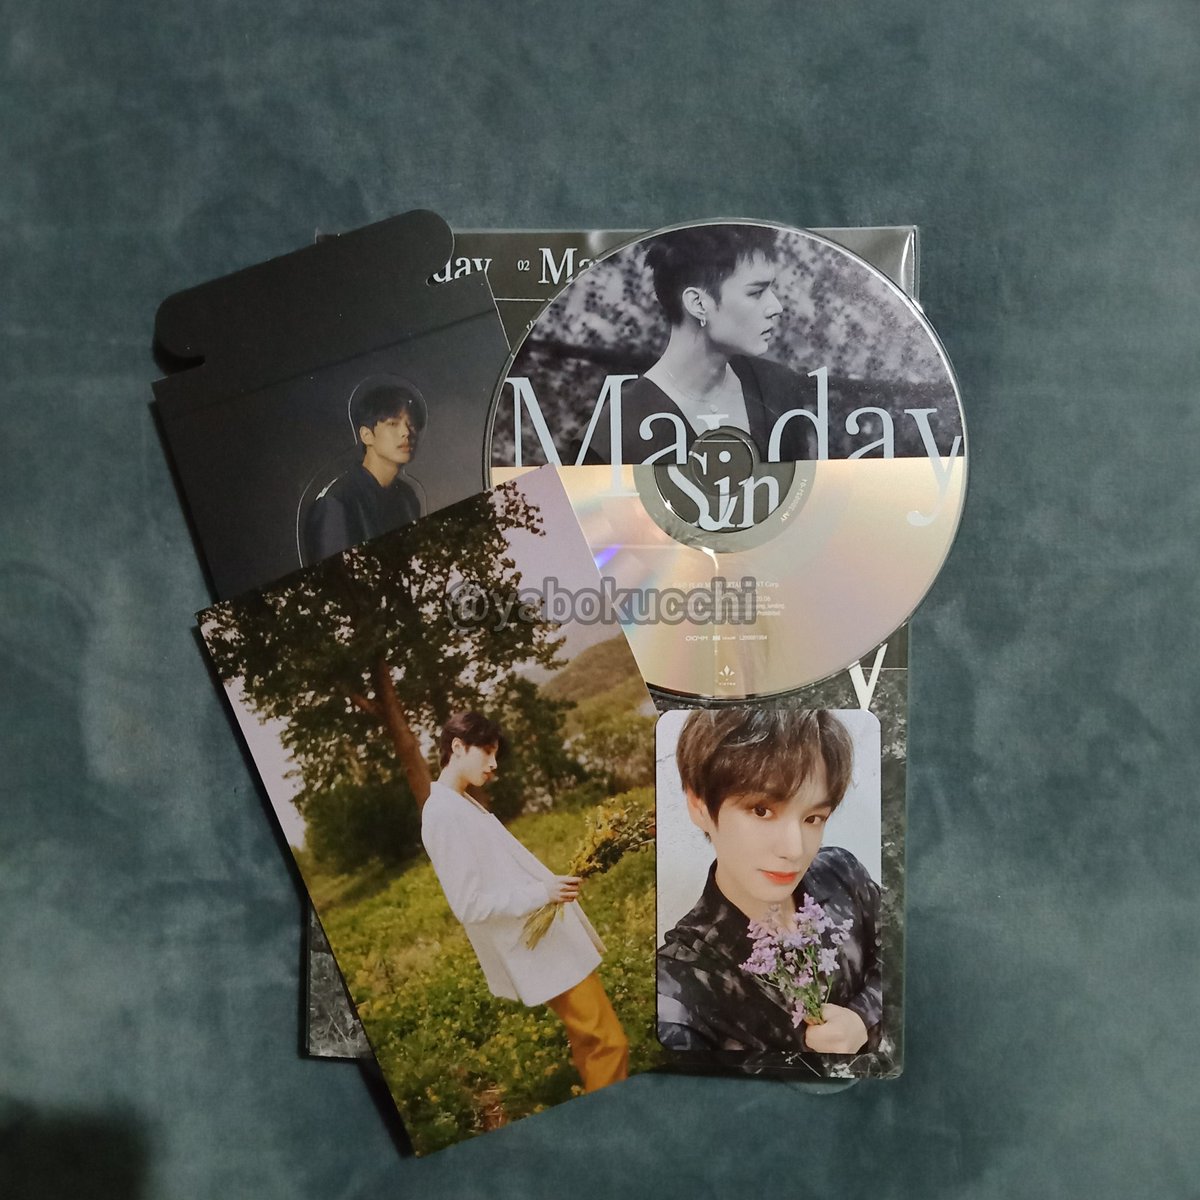 Last mayday album! I am a Chan magnet  Anybody who wants to trade it to a Swoo maider pc? :< I got two Chan maider pc because he loves me too much I also completed wooni's postcard 